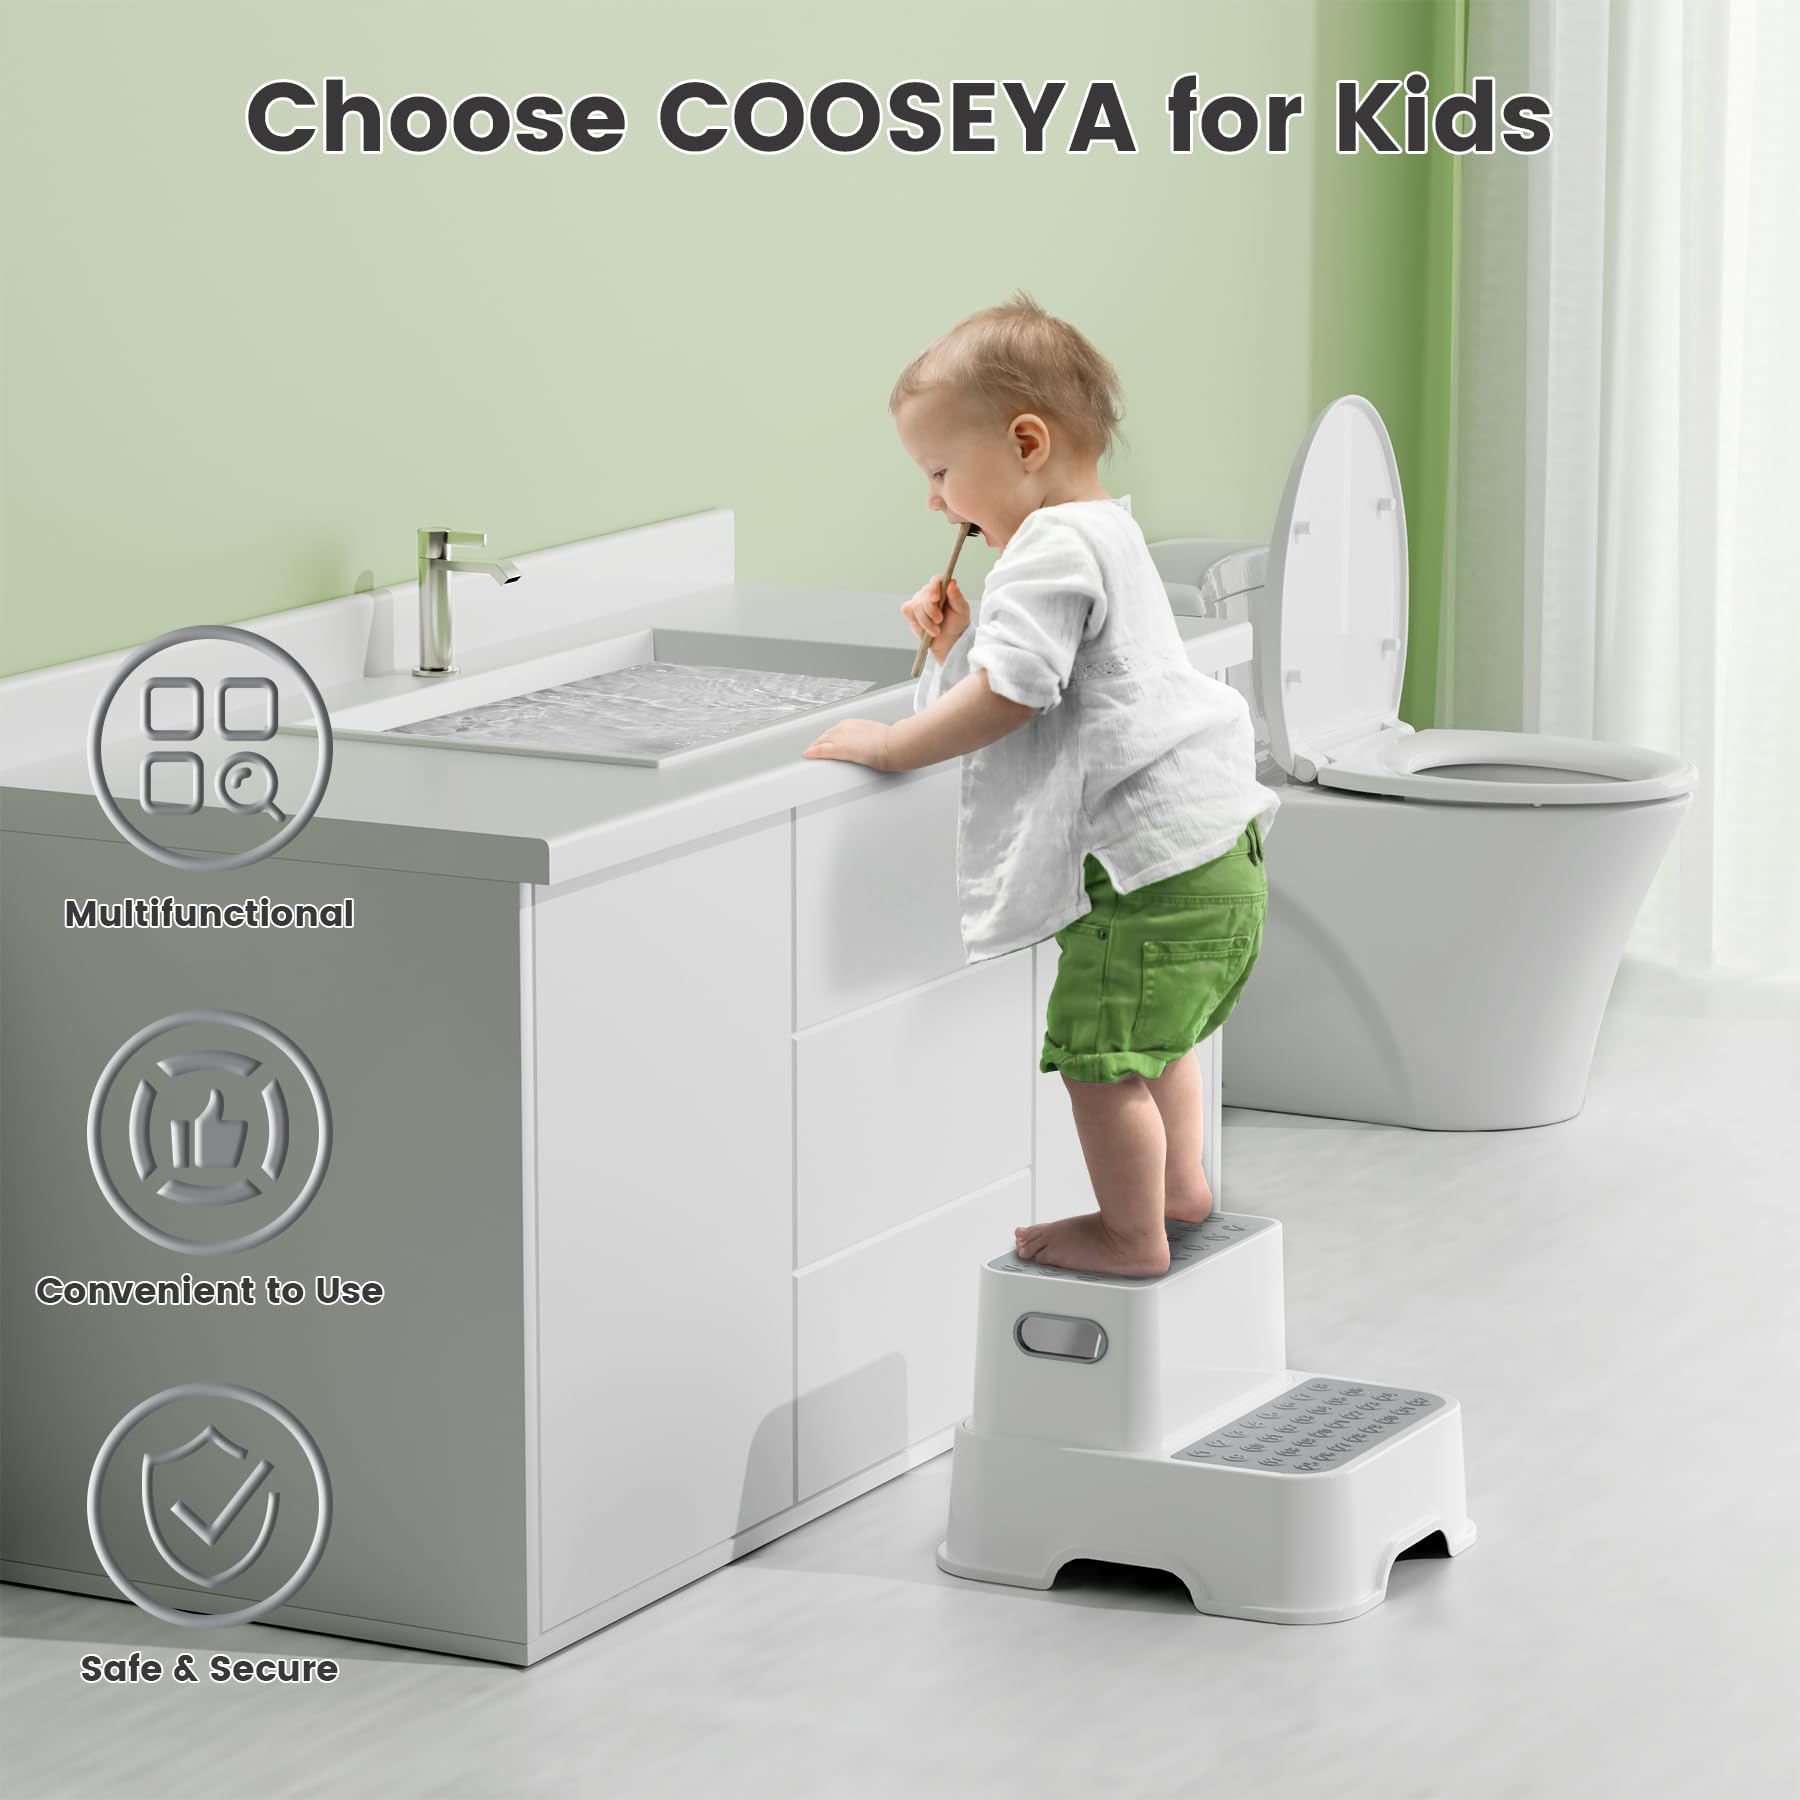 COOSEYA 2 Step Stools for Kids,Toddler Step Stool for Bathroom Sink,No-Slip Double up Step Stool for Toddlers Bathroom, Multifunctional Toilet Step Stool for Kids,Toilet Potty Training(2 Packs)